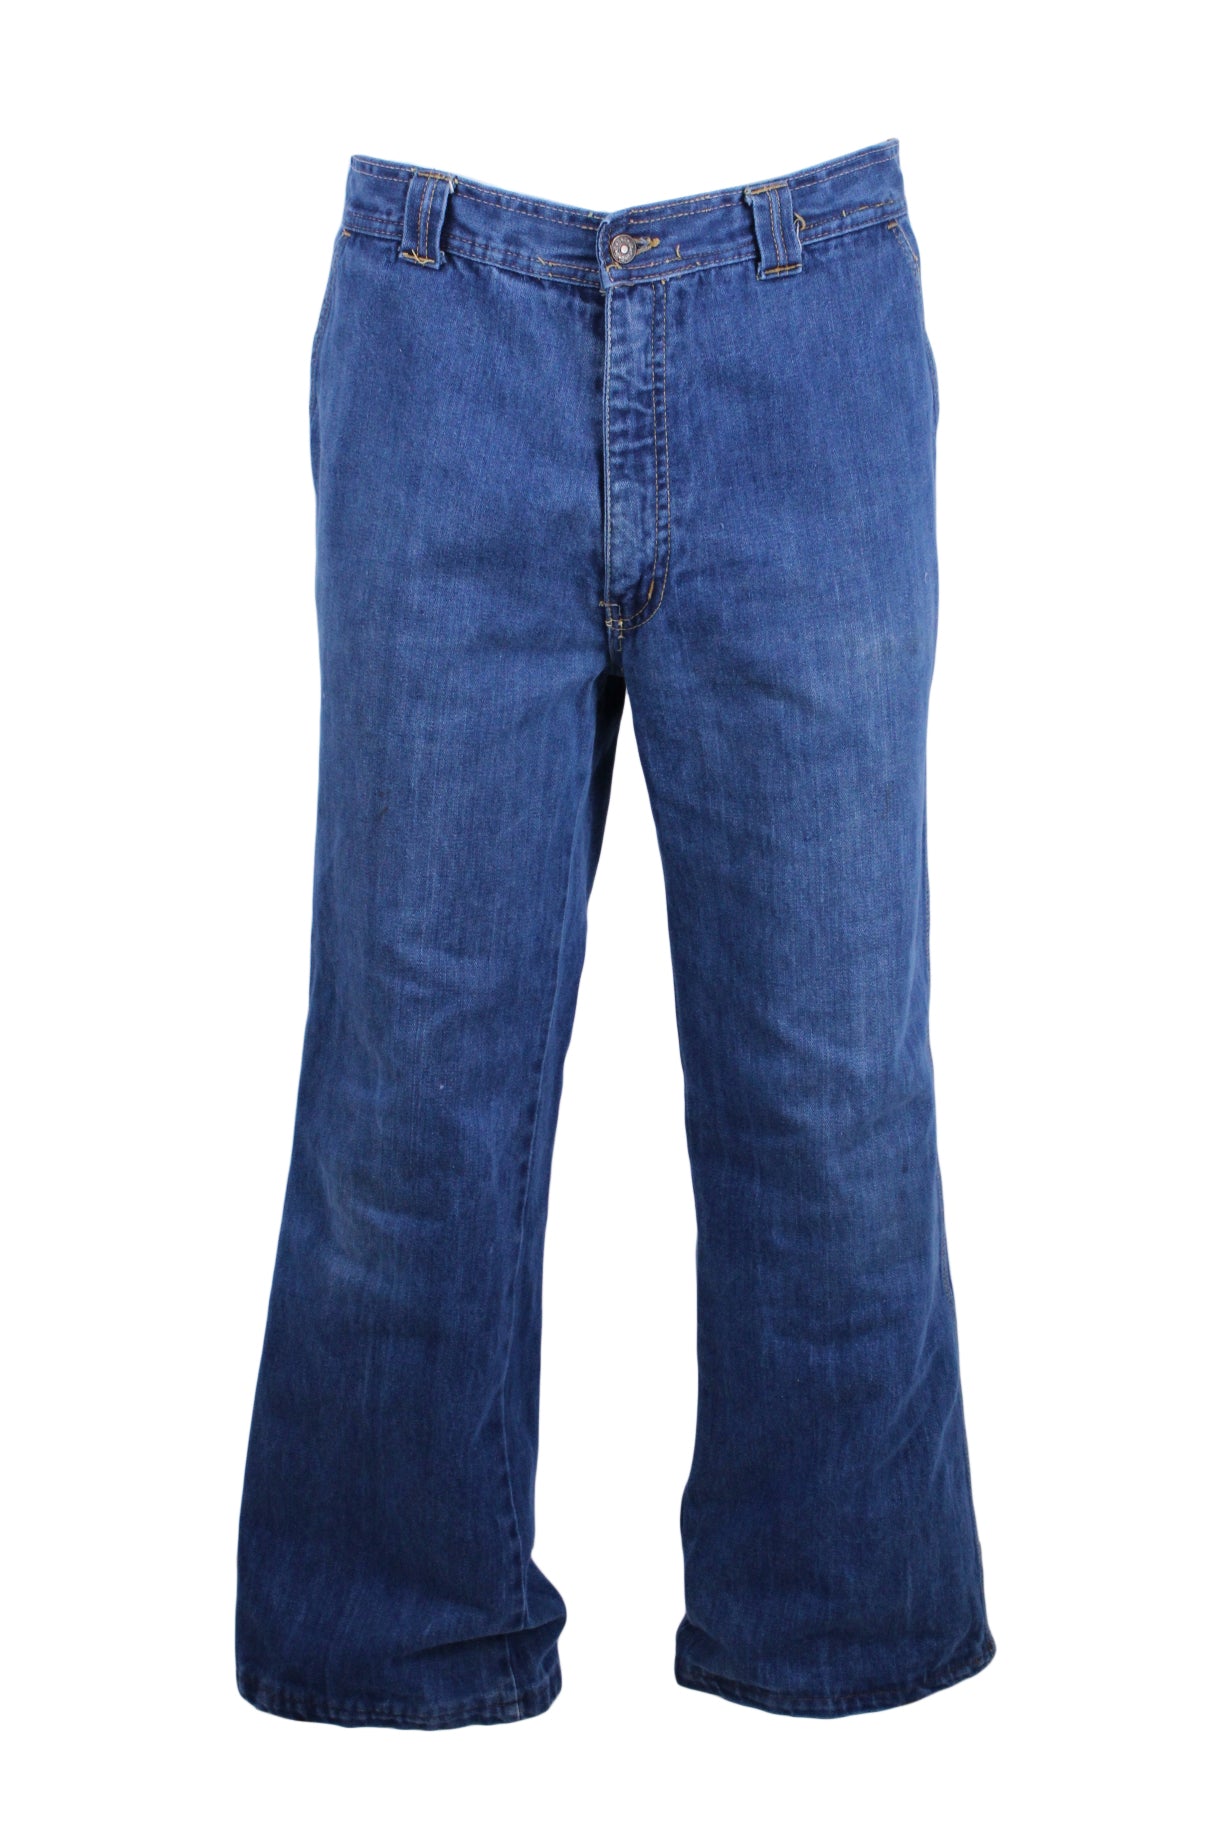 front view of unlabeled blue gender neutral denim jeans. features side hand pockets, rear patch pockets with stitch accents, and zip fly with button closure.